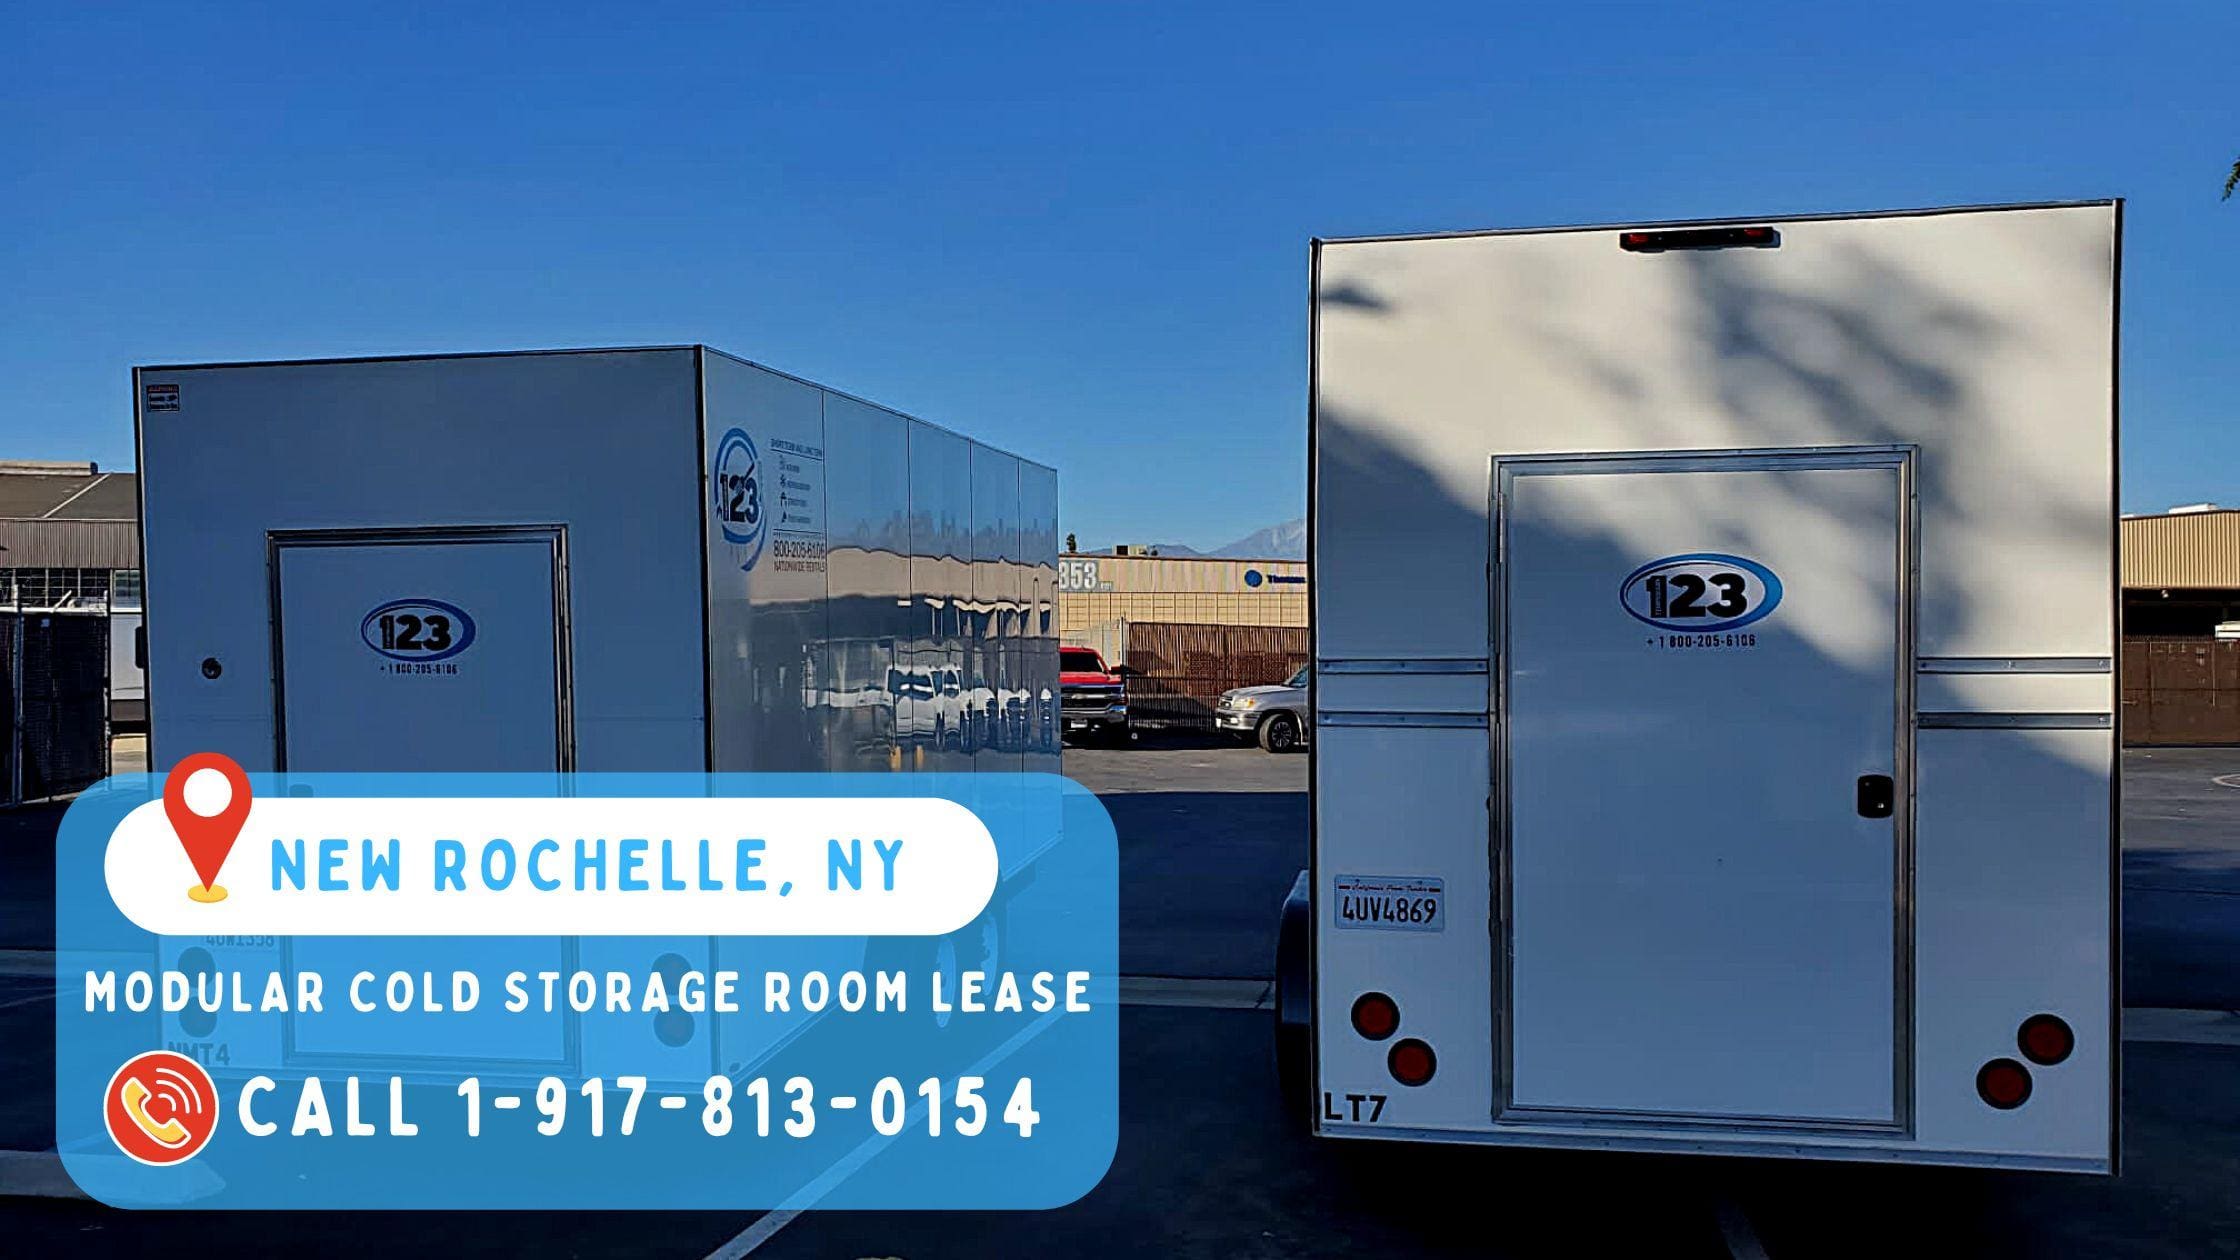 Modular Cold Storage Room Lease in New Rochelle